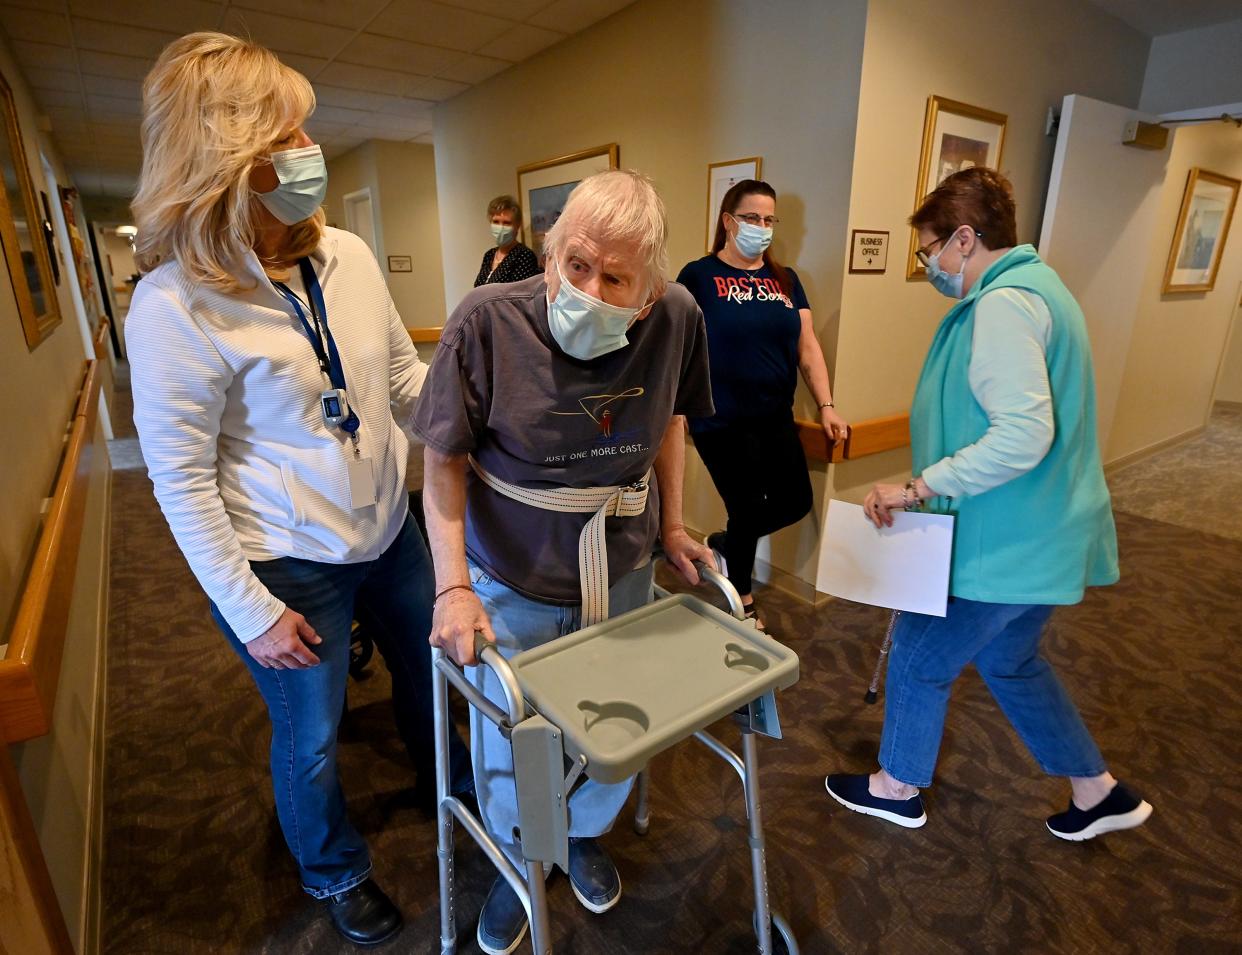 Christopher House resident Donald Brickman, 88, walks in the hallway with Debbie Sherman, left.